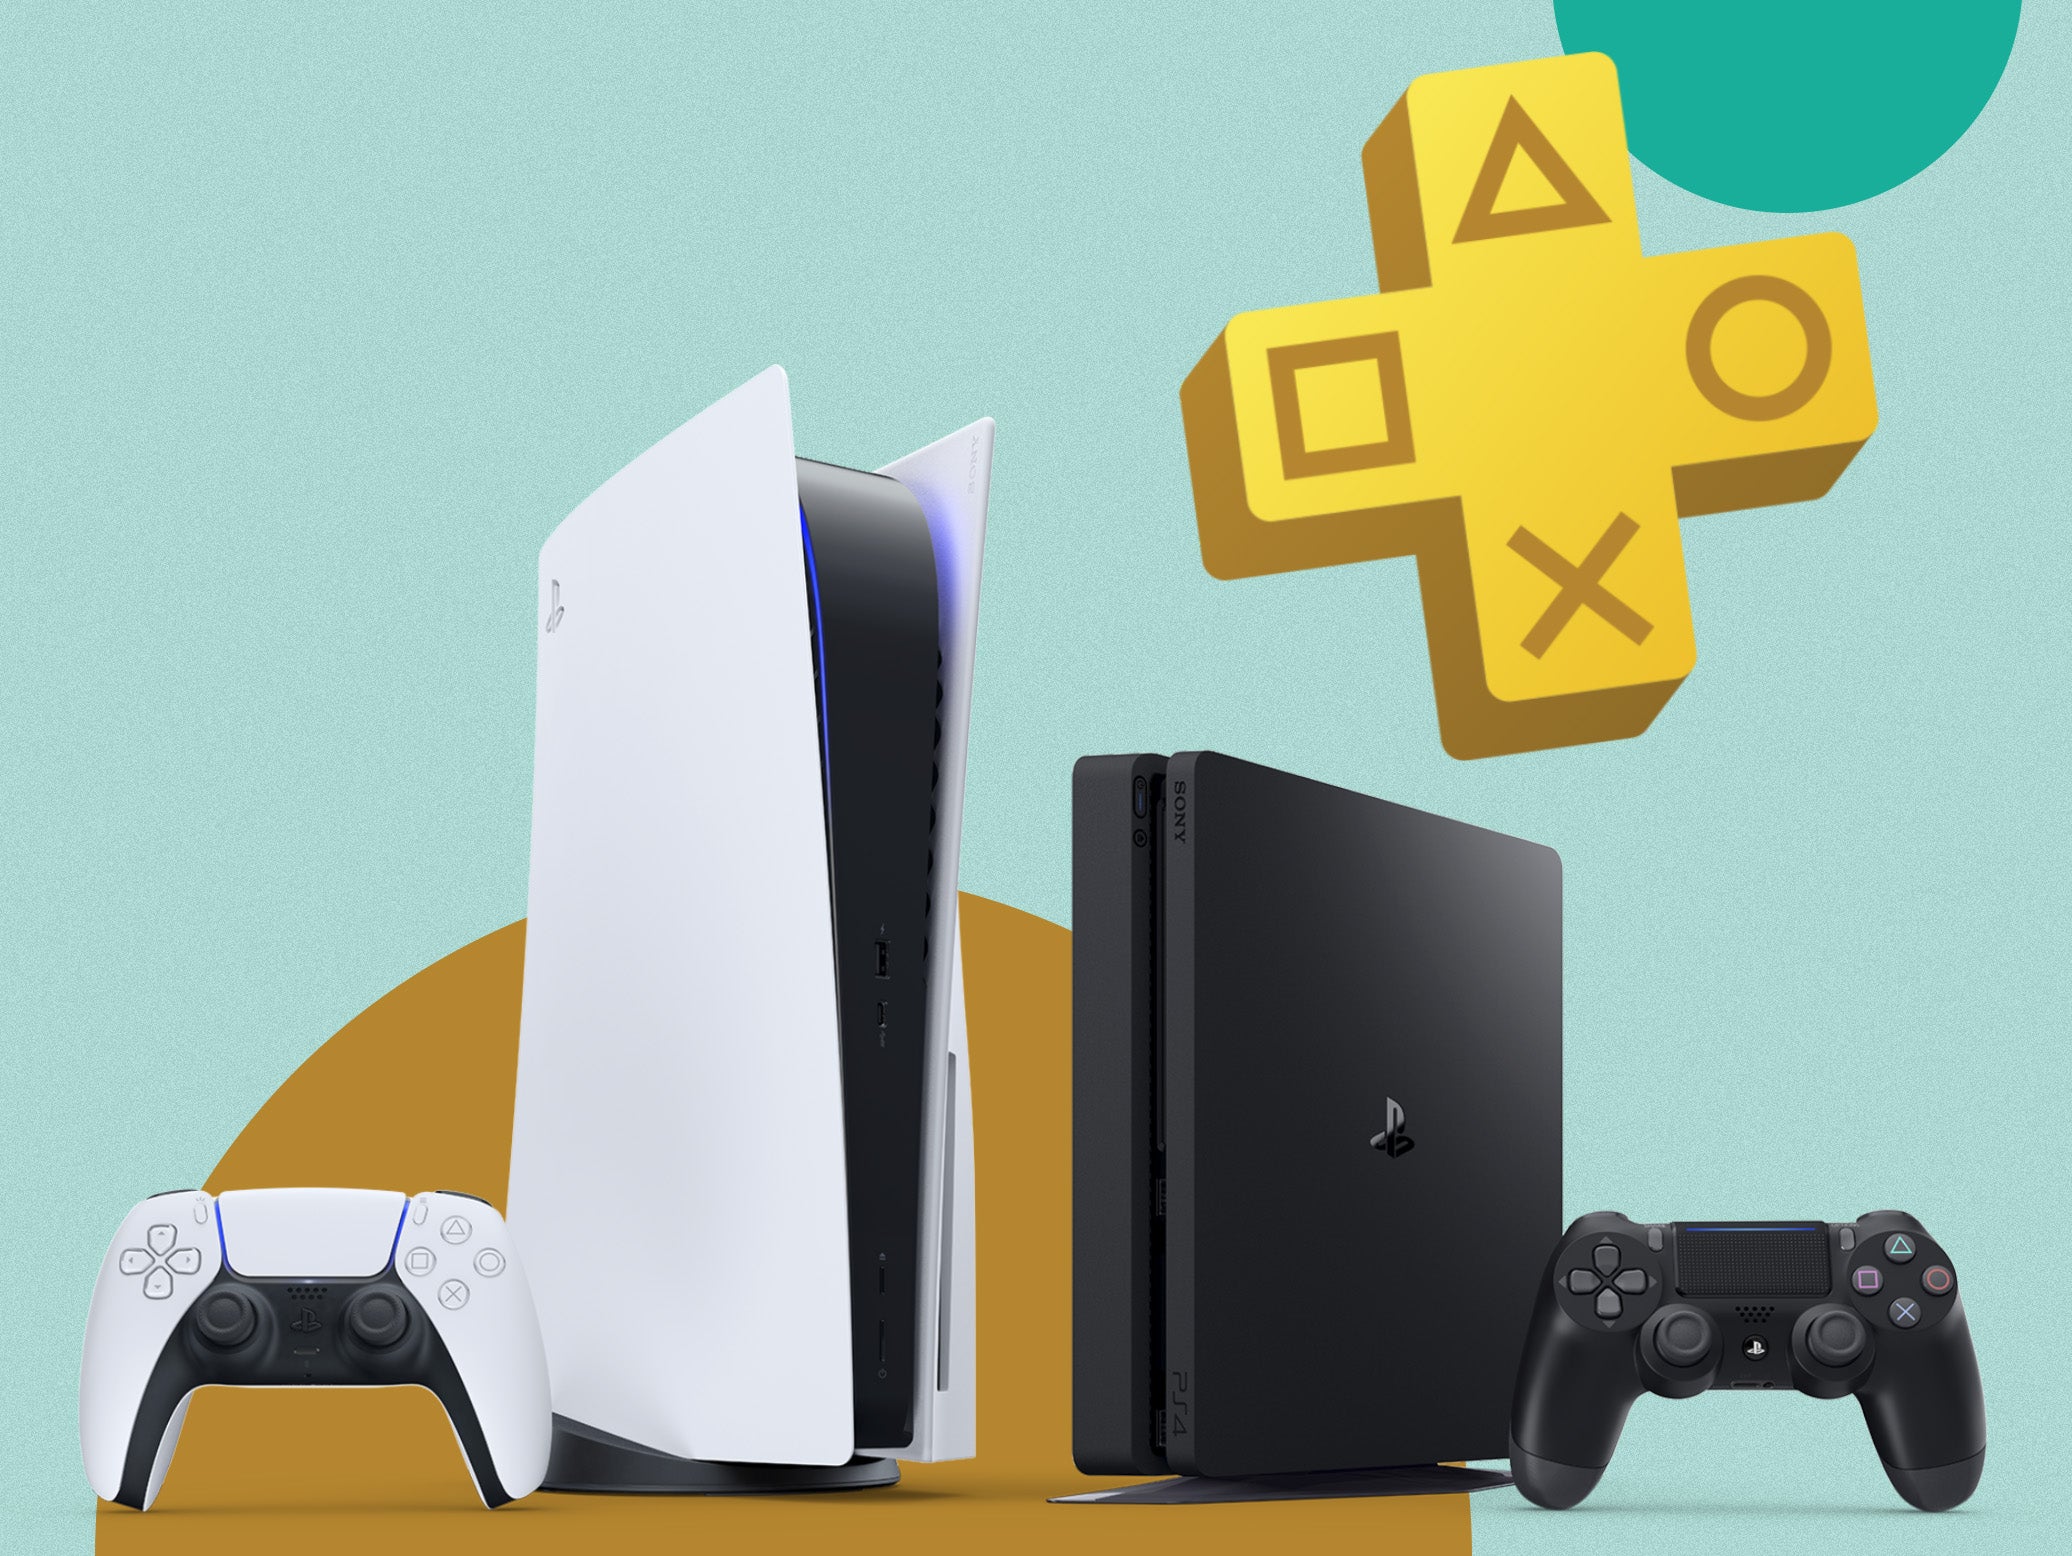 Subscribers can get access to up to three new games each month at no extra cost